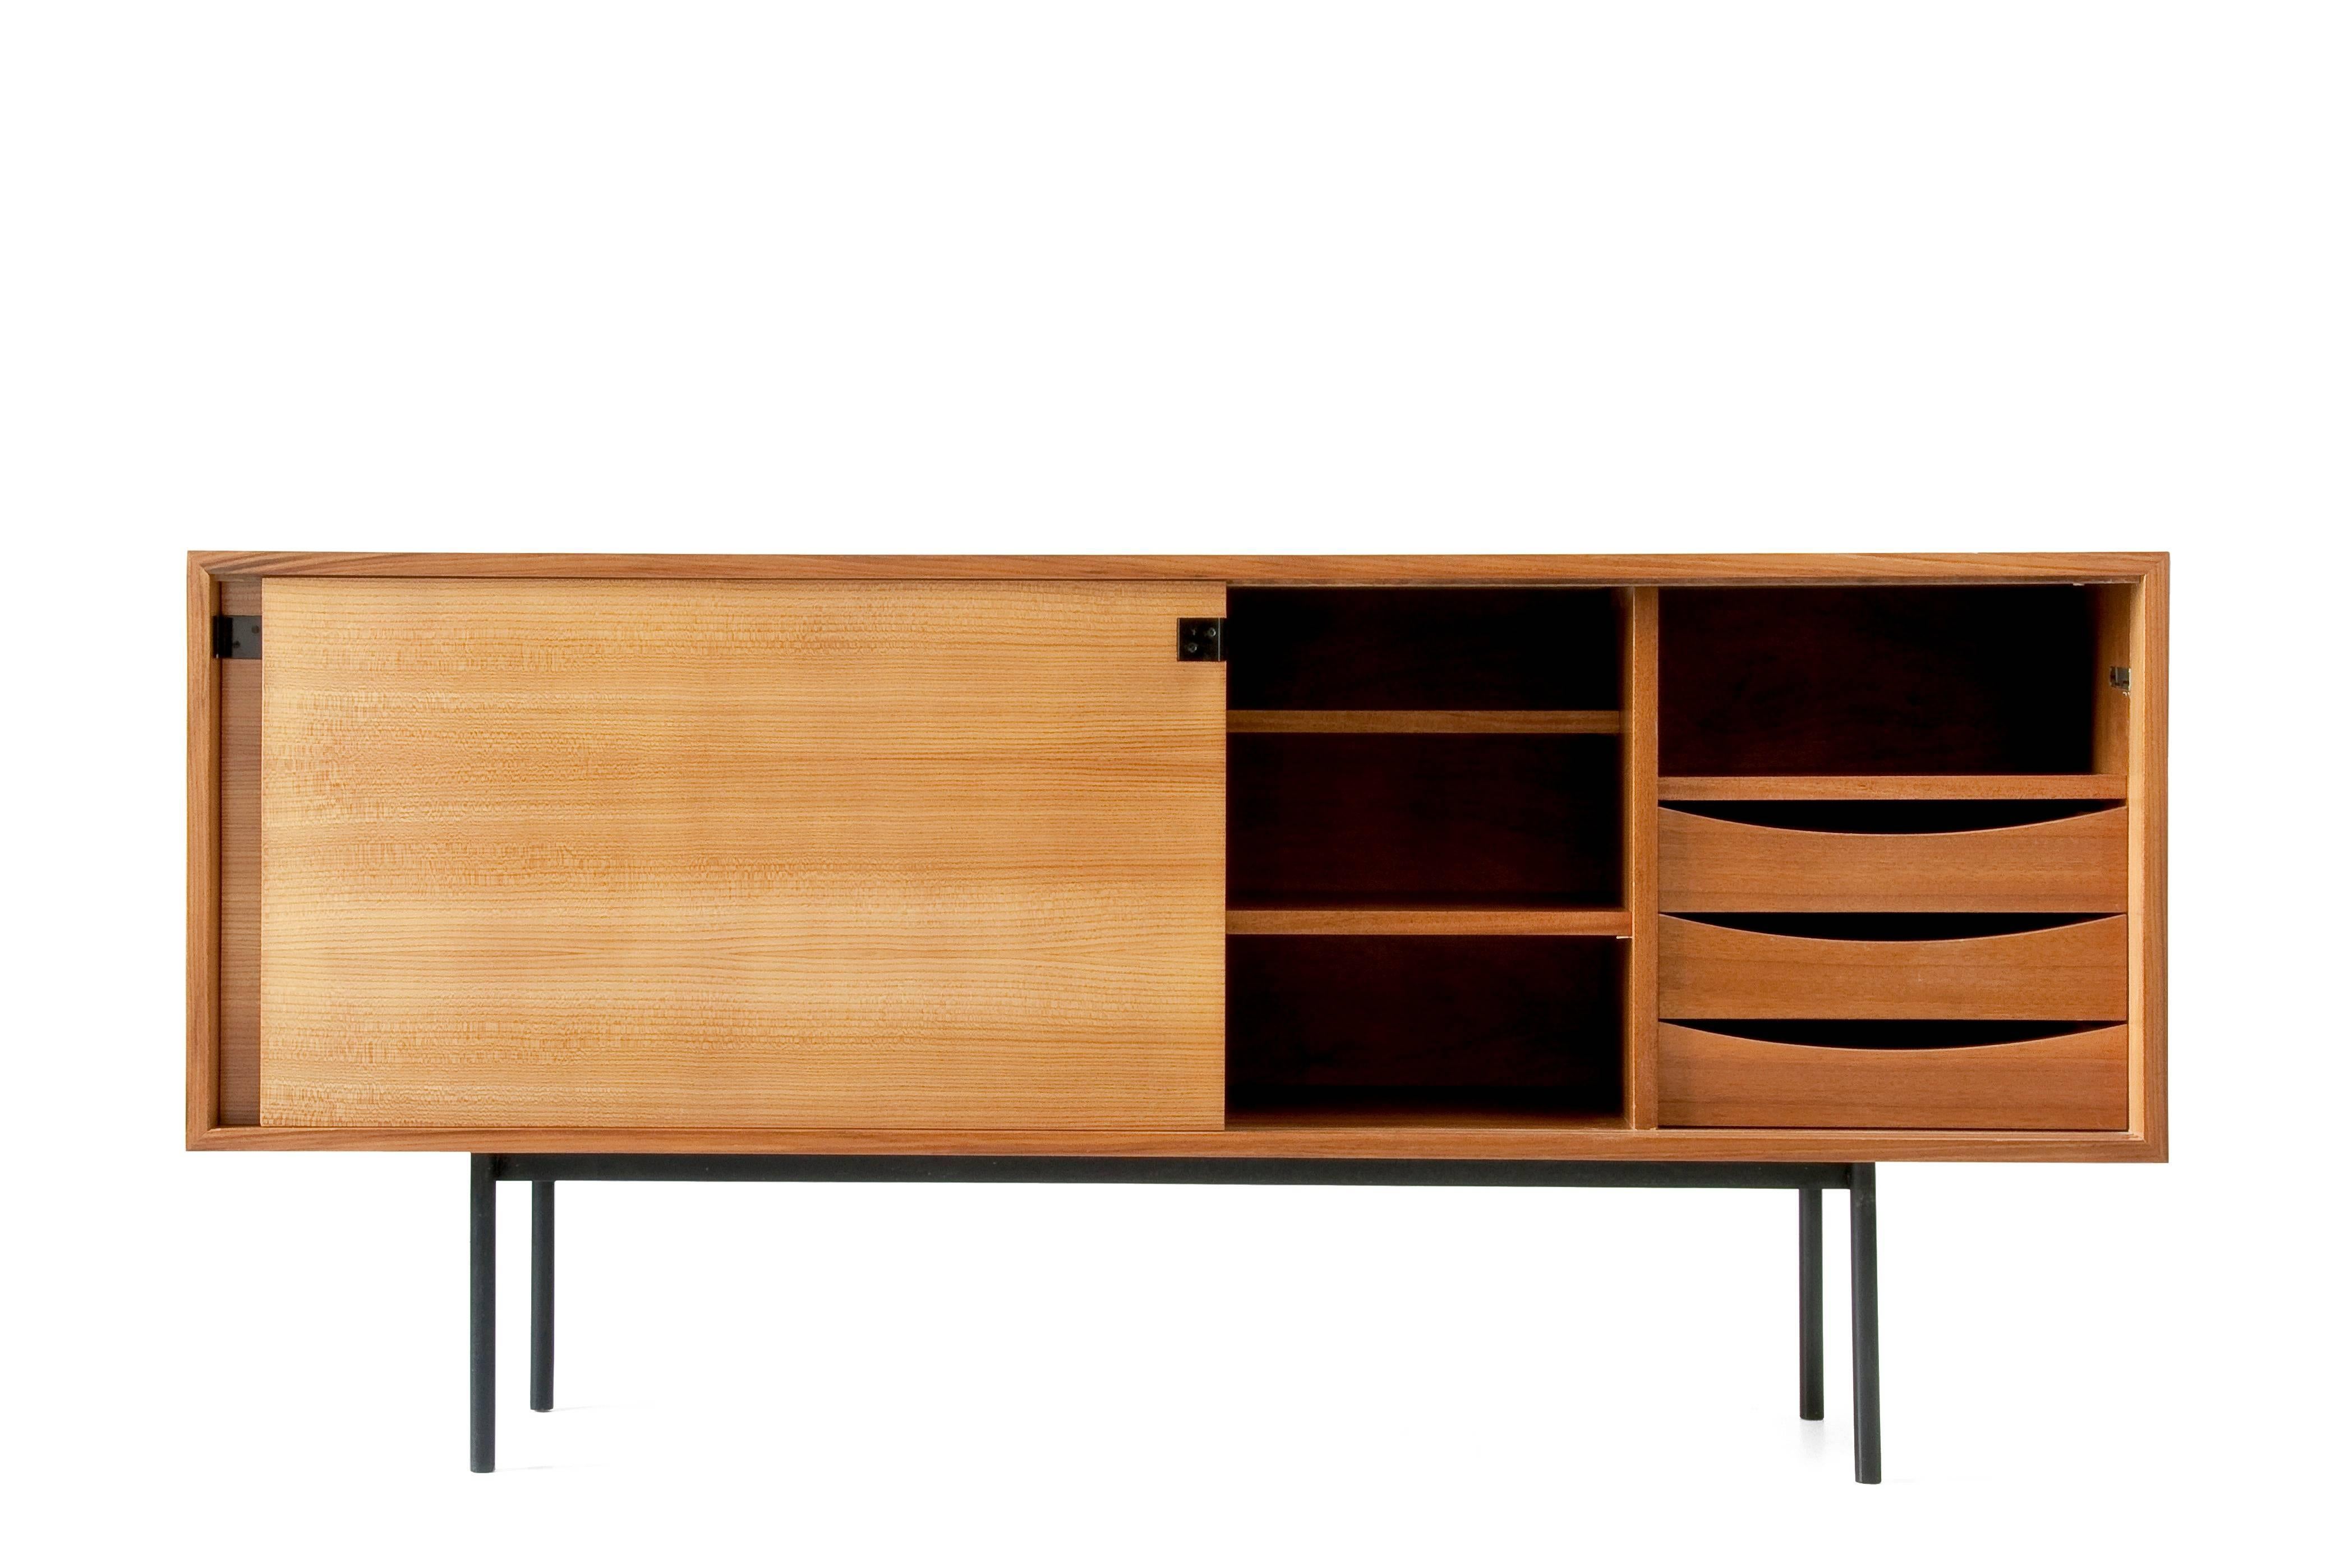 French Alain Richard sideboard 196 - Meubles TV edition - 1953/1954 For Sale